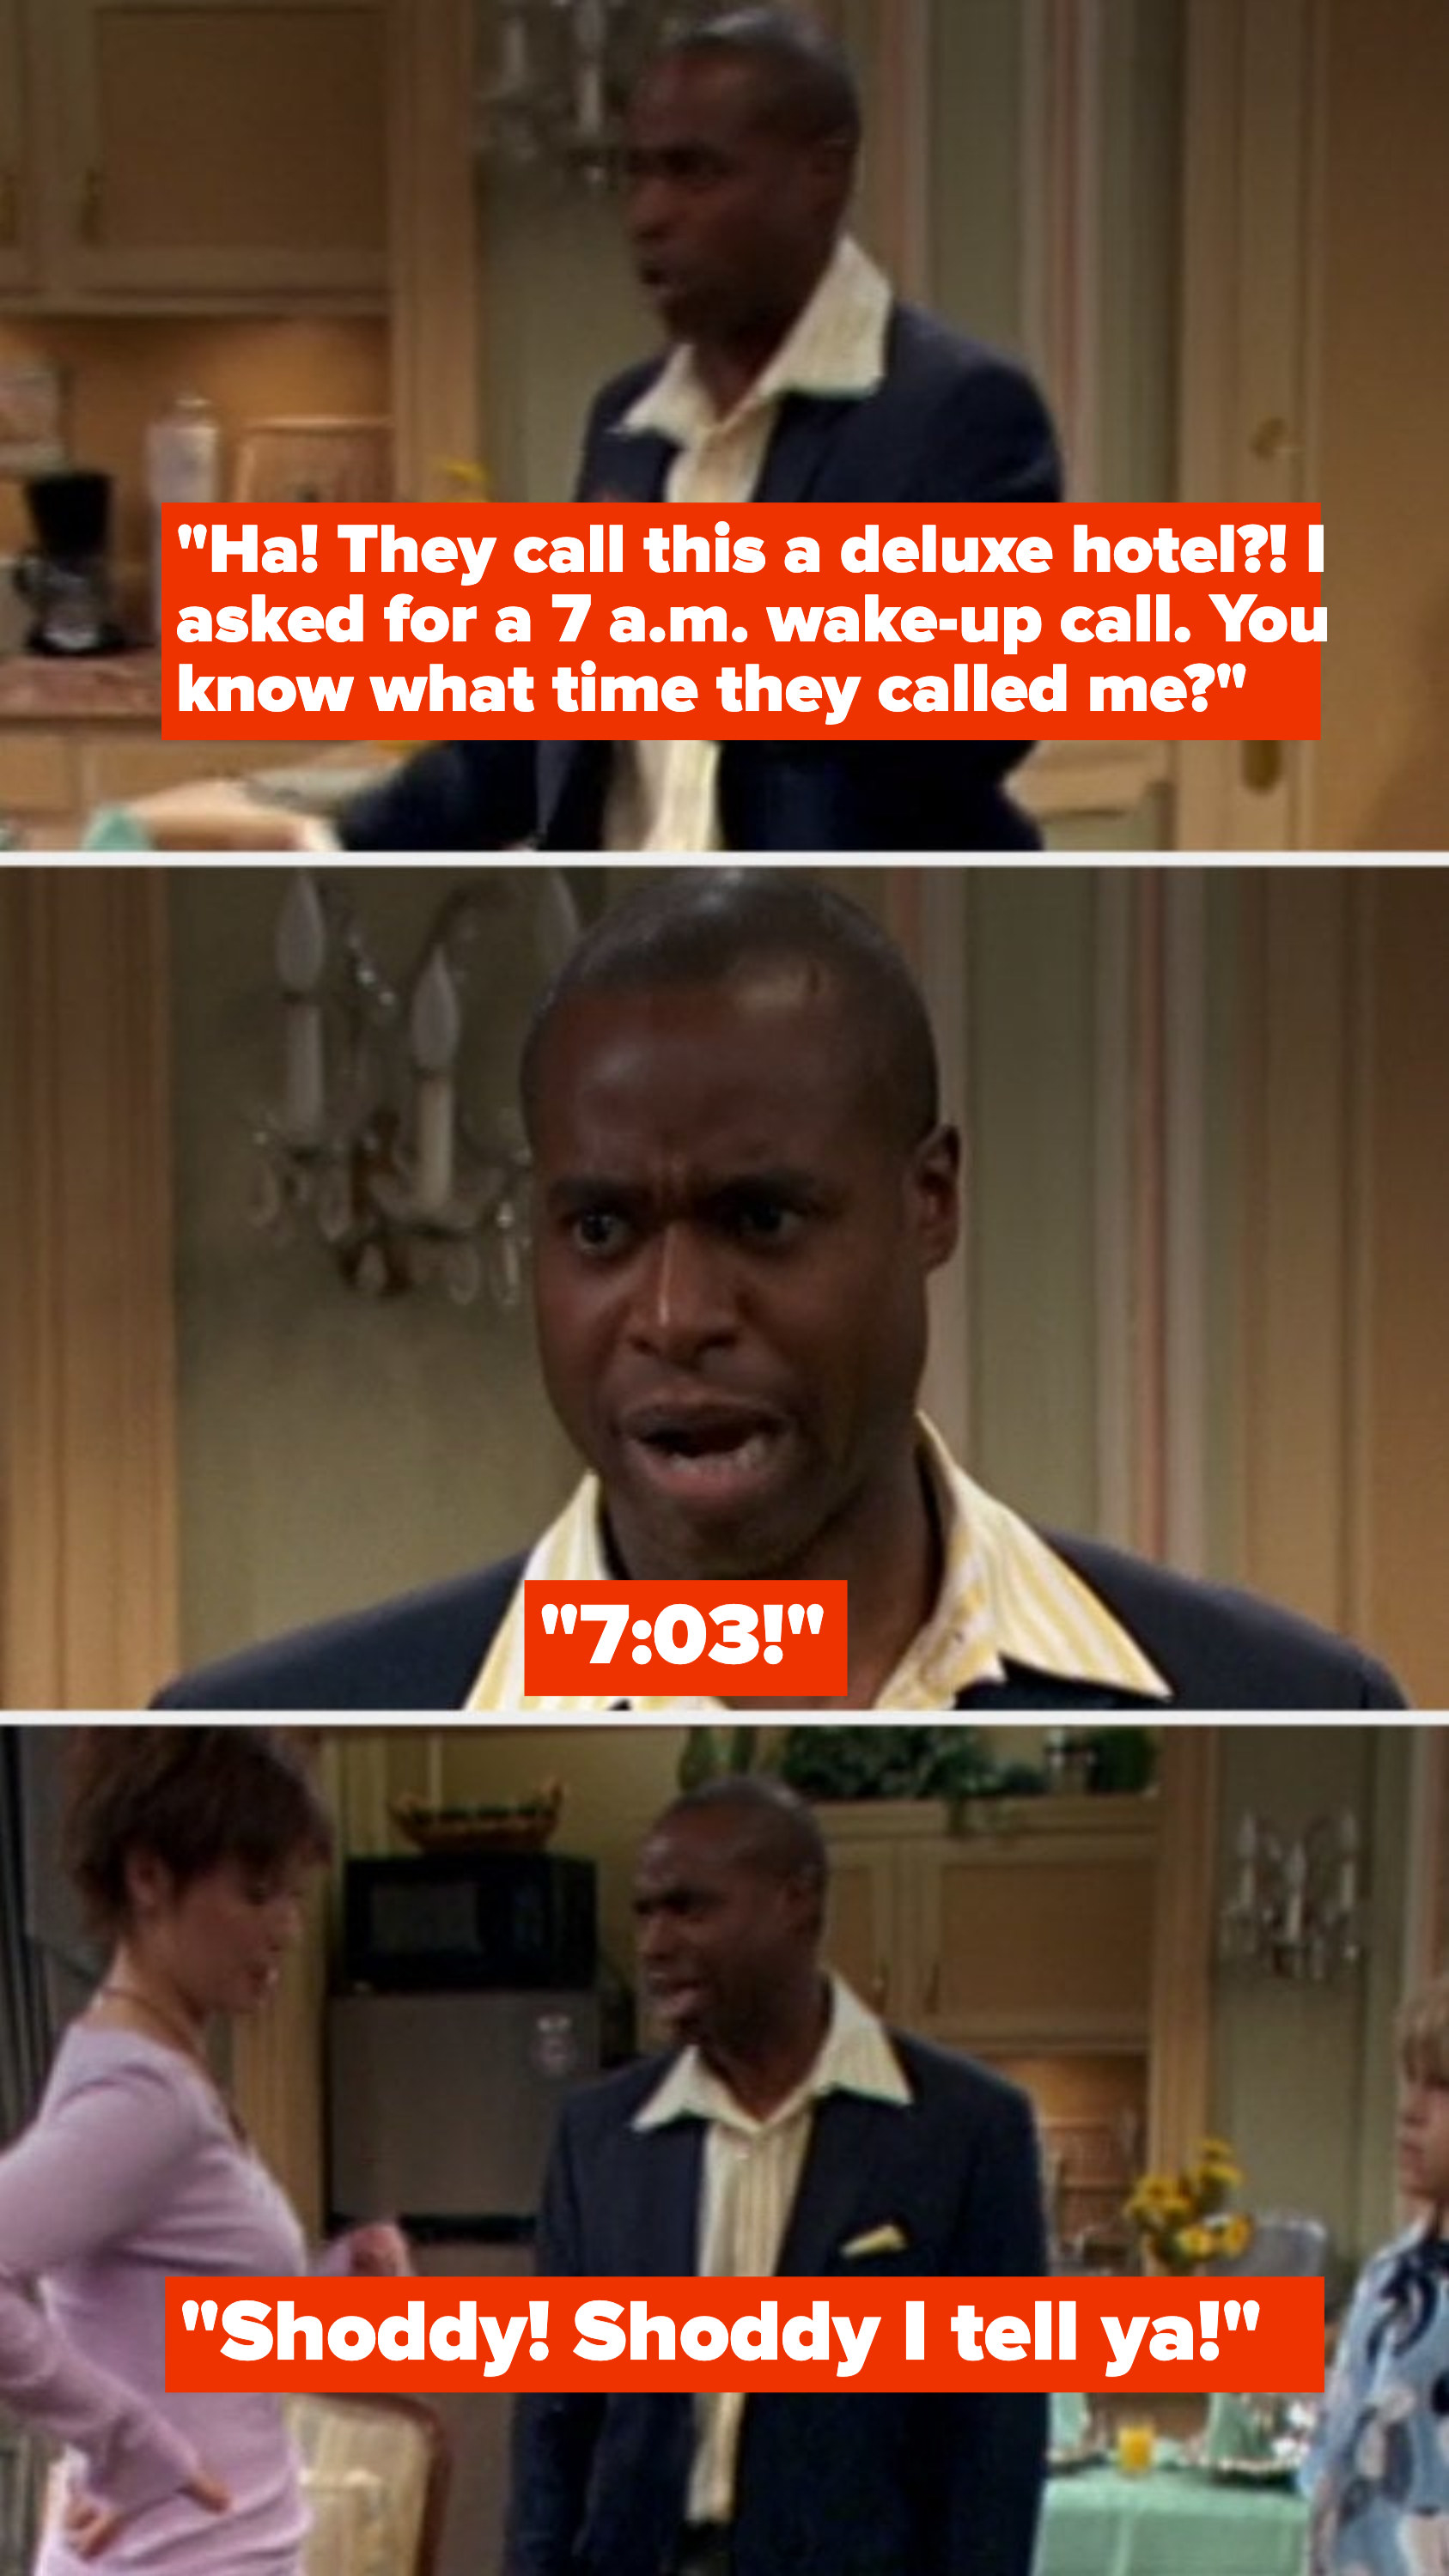 Mr. Moseby complains that his wake-up call was three minutes late